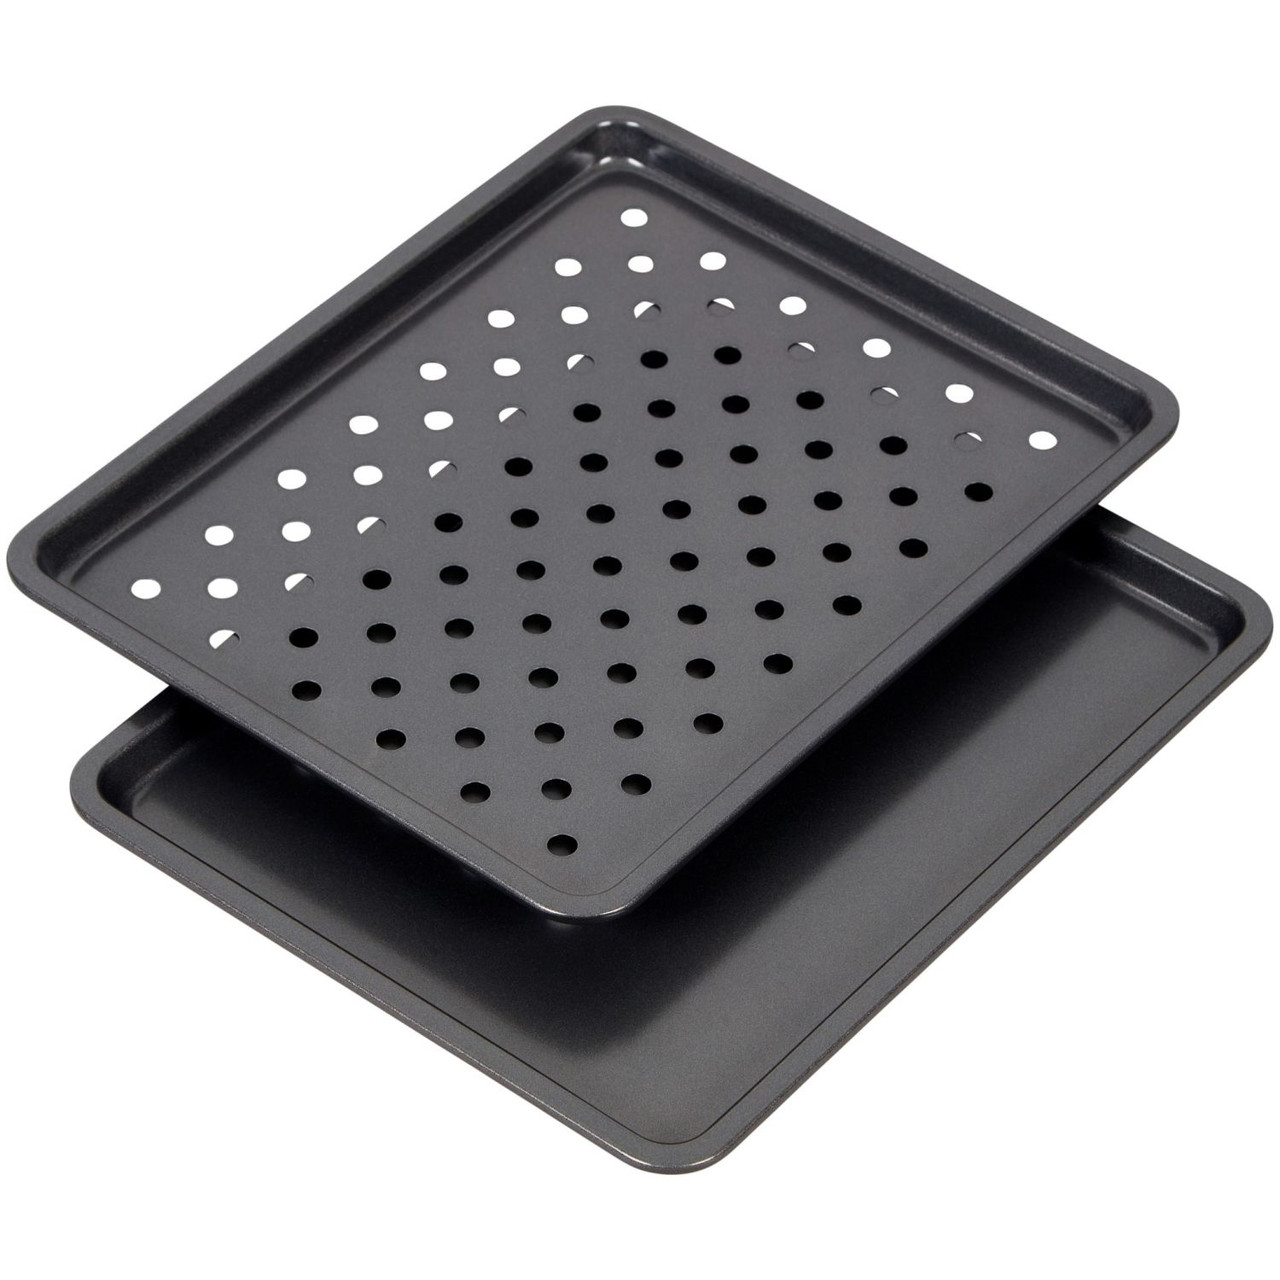 The Perfect Little Sheet Pan for Small Toaster Ovens